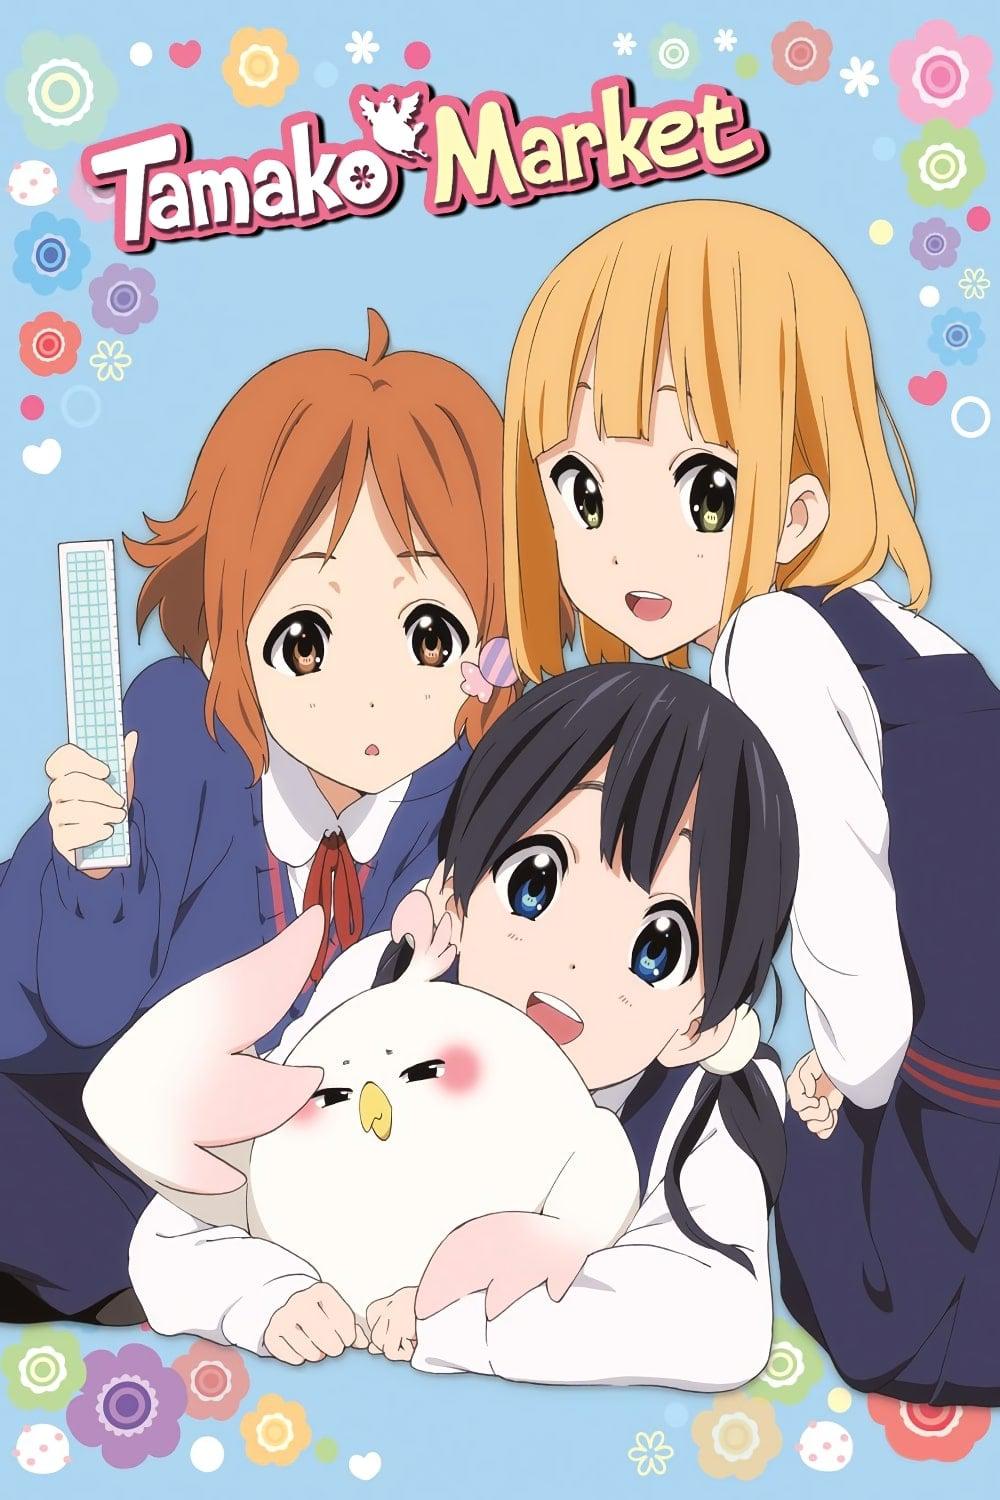 TV ratings for Tamako Market (たまこまーけっと) in the United Kingdom. Pony Canyon TV series